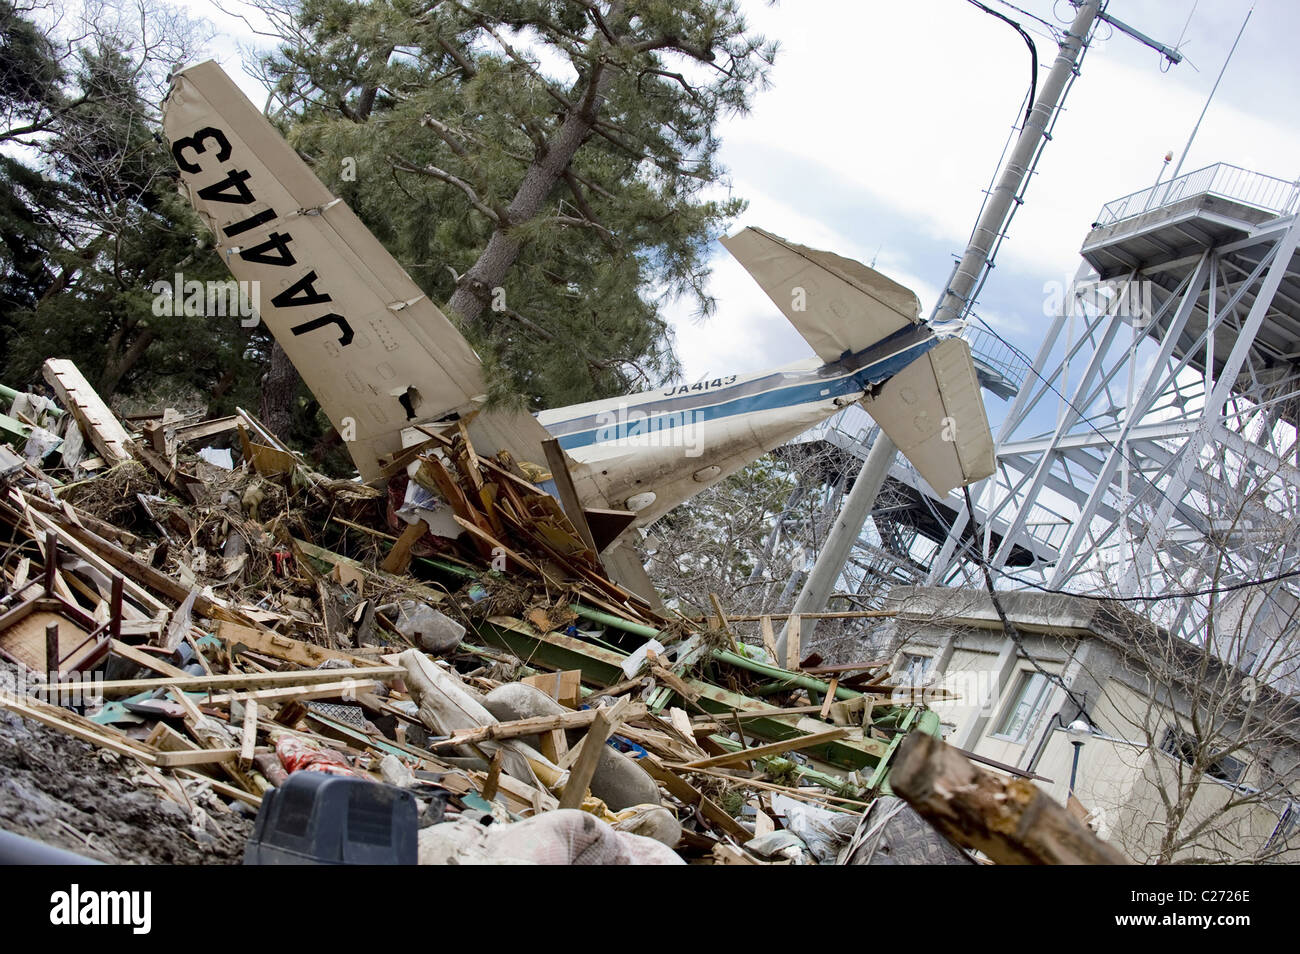 A wrecked plane lies among debris at Sendai Airport, Japan, in the aftermath of the March 2011 earthquake + tsunami. Stock Photo